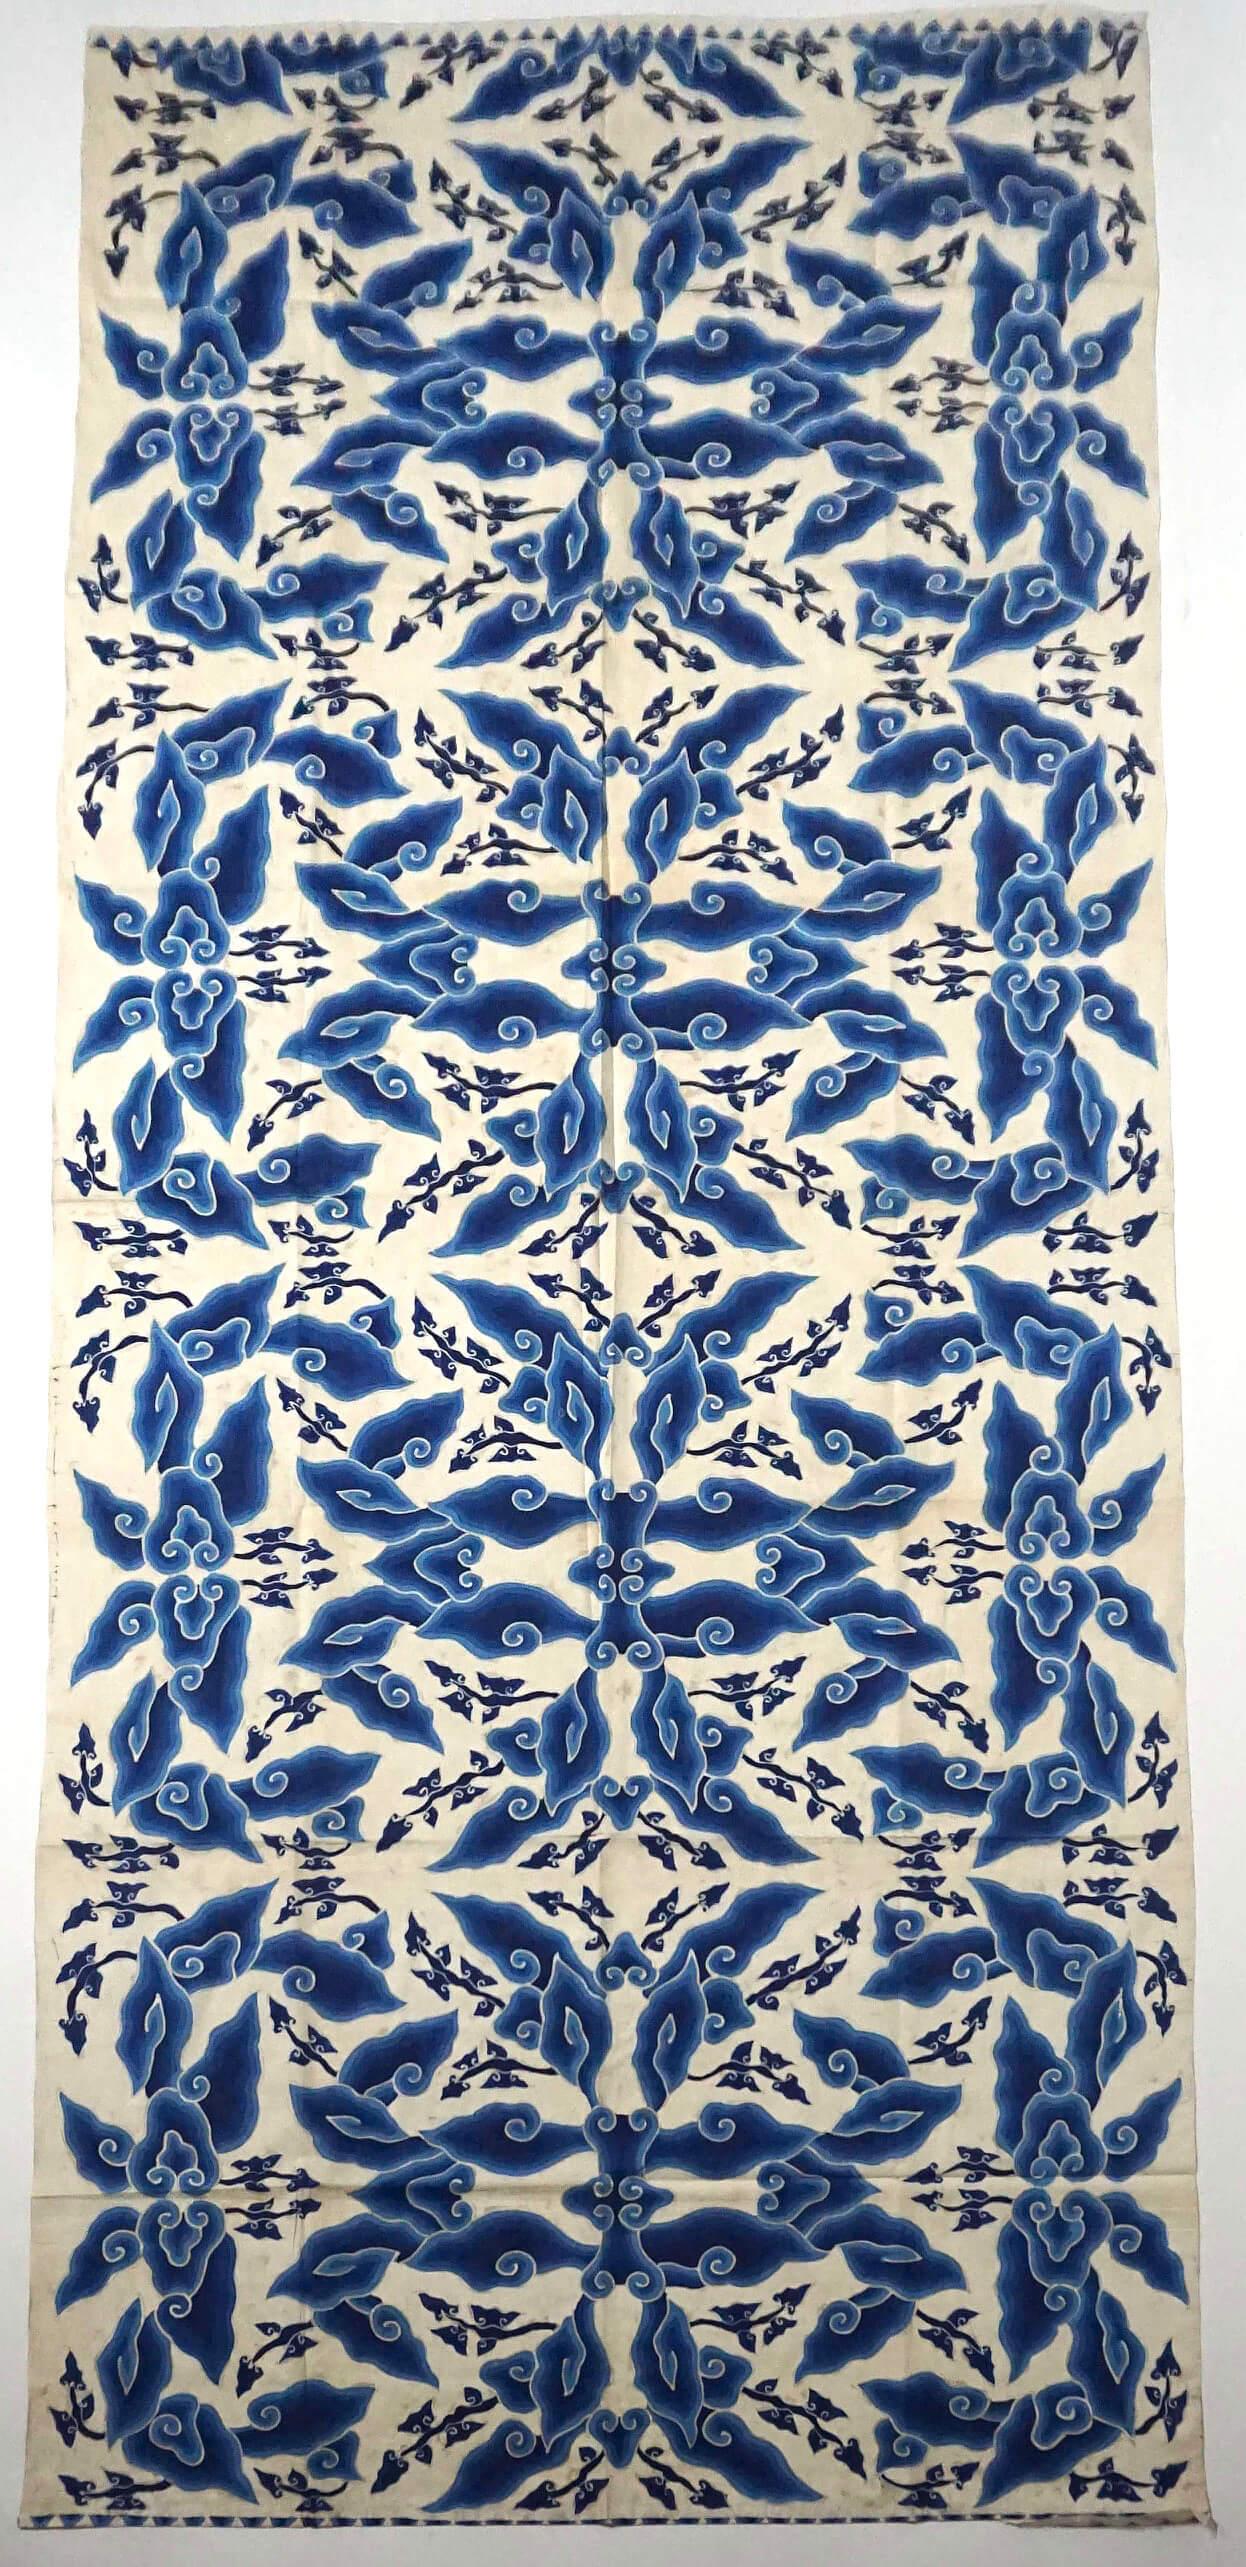 Indonesian Blue & White Megamendung or Clouds Pattern Batik Panel, circa 1930 In Good Condition For Sale In Kinderhook, NY